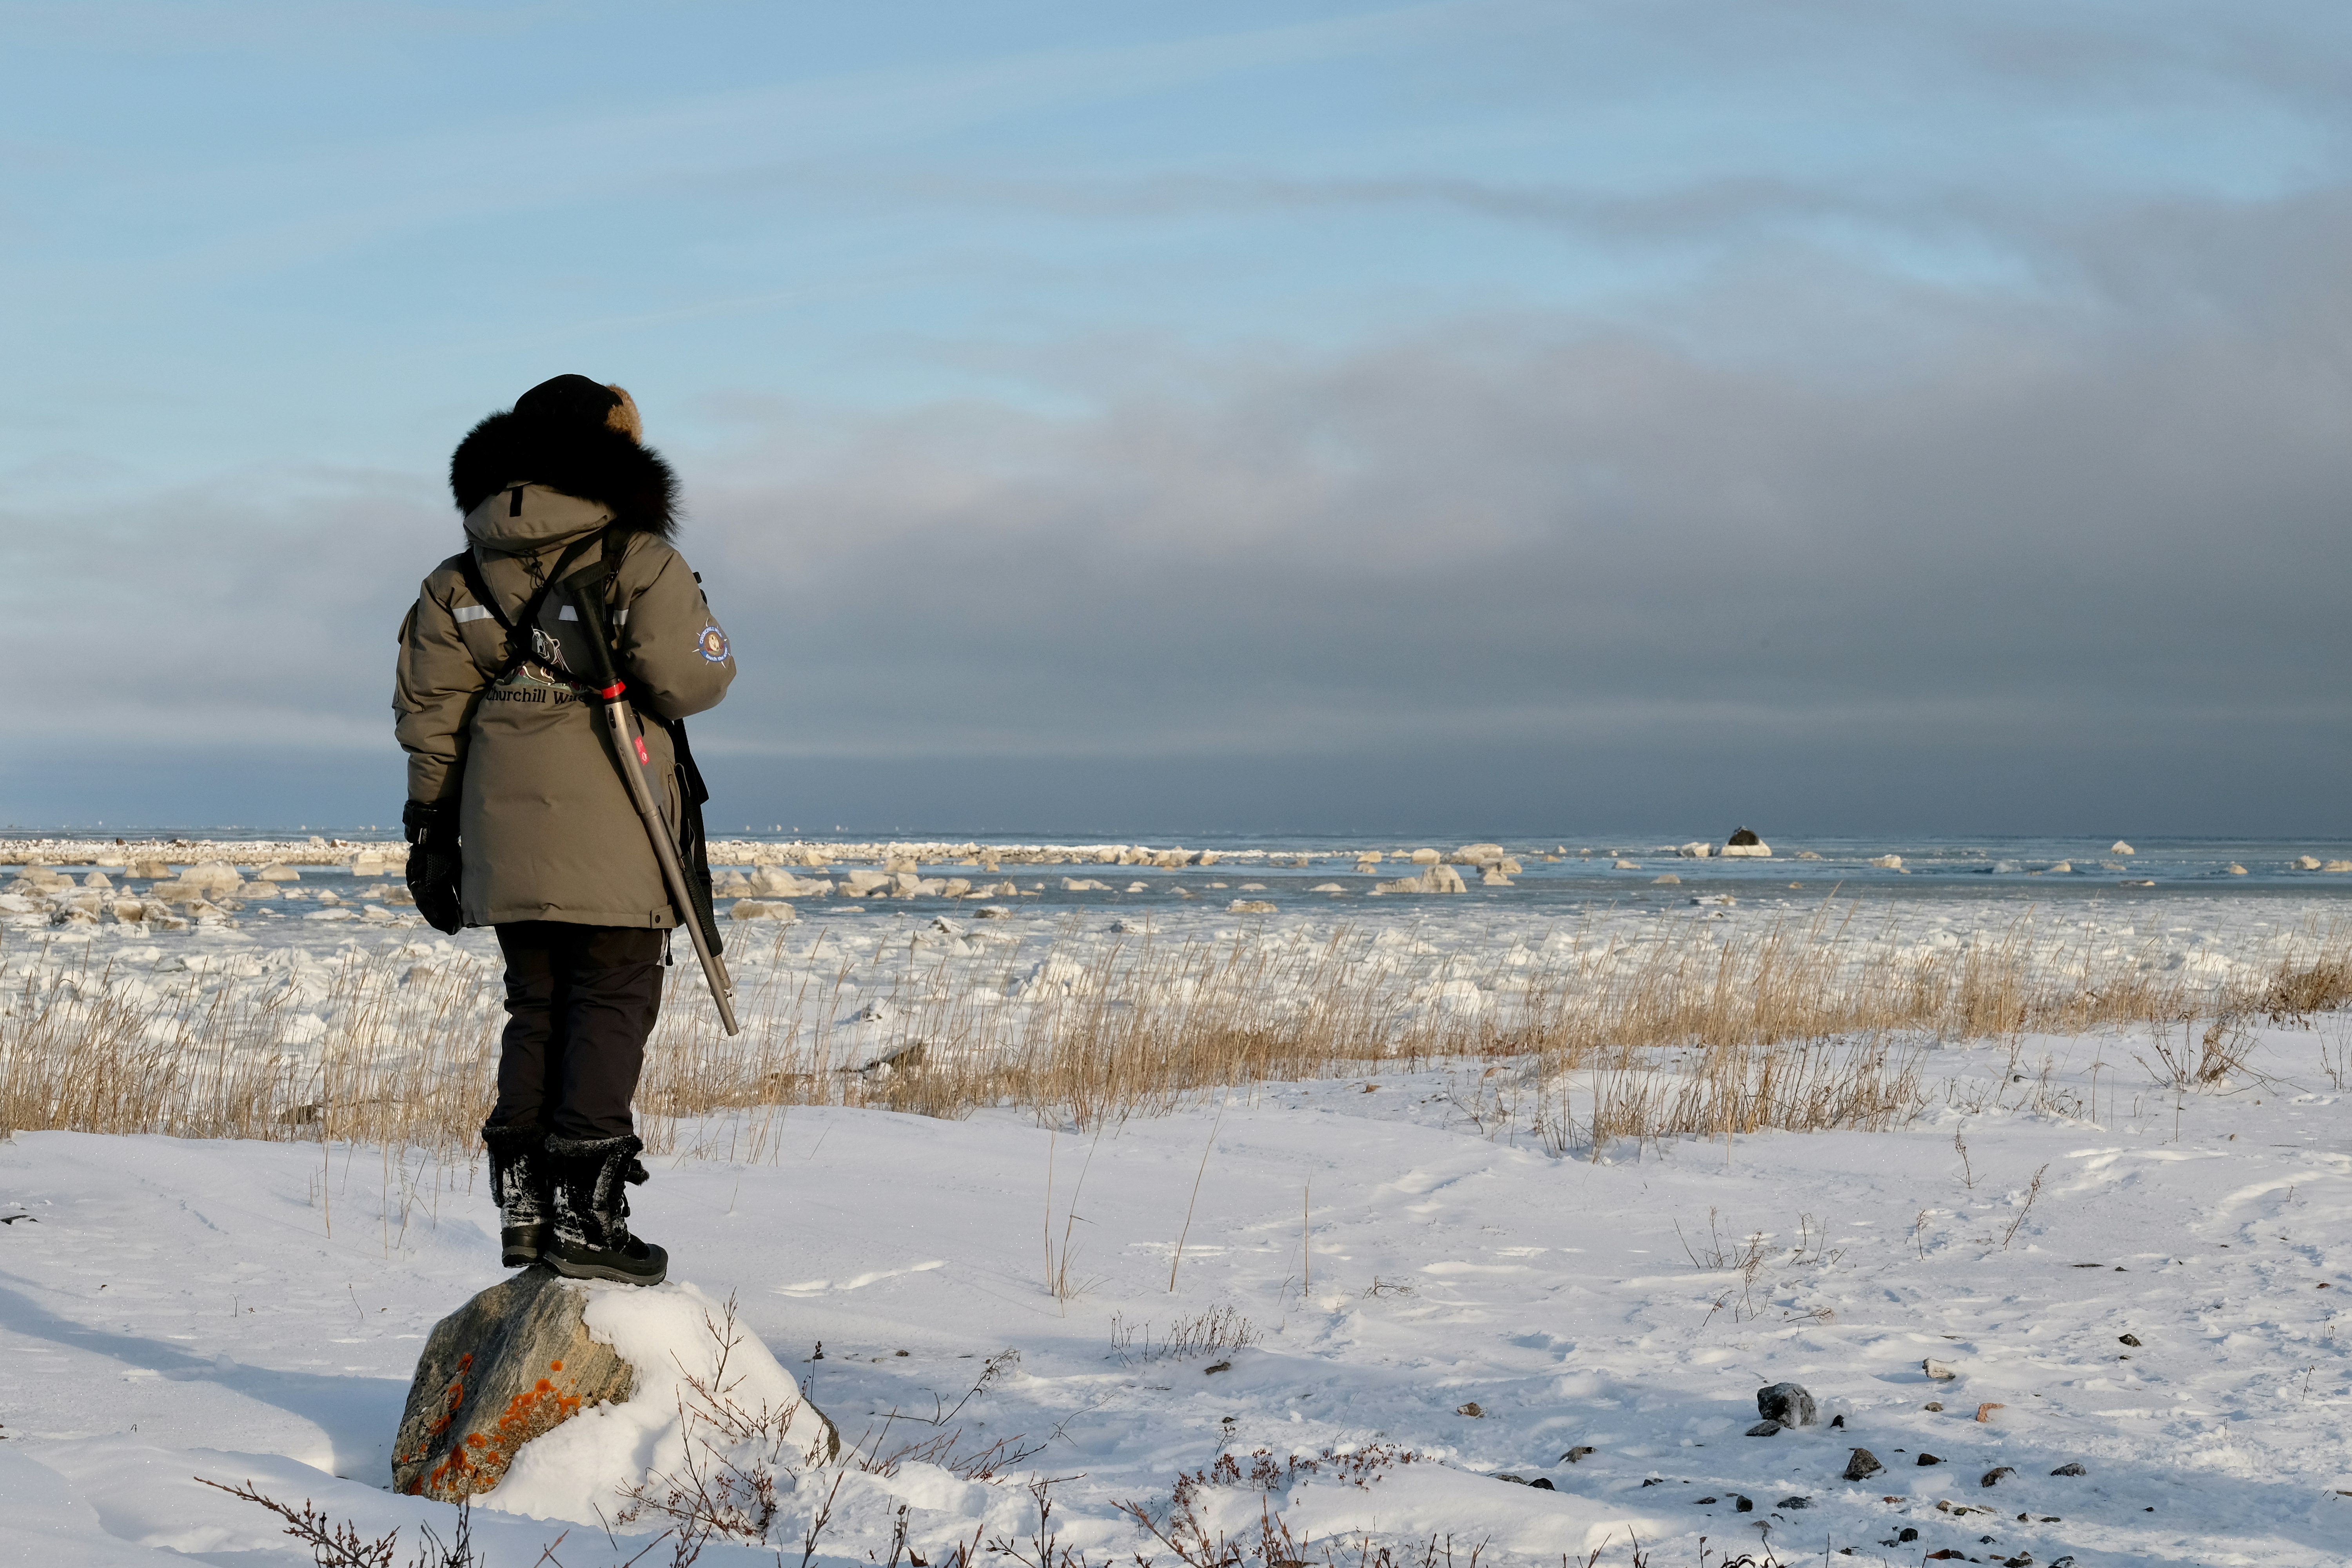 A guide dressed warmly in a winter coat watches for polar bears across snowy tundra